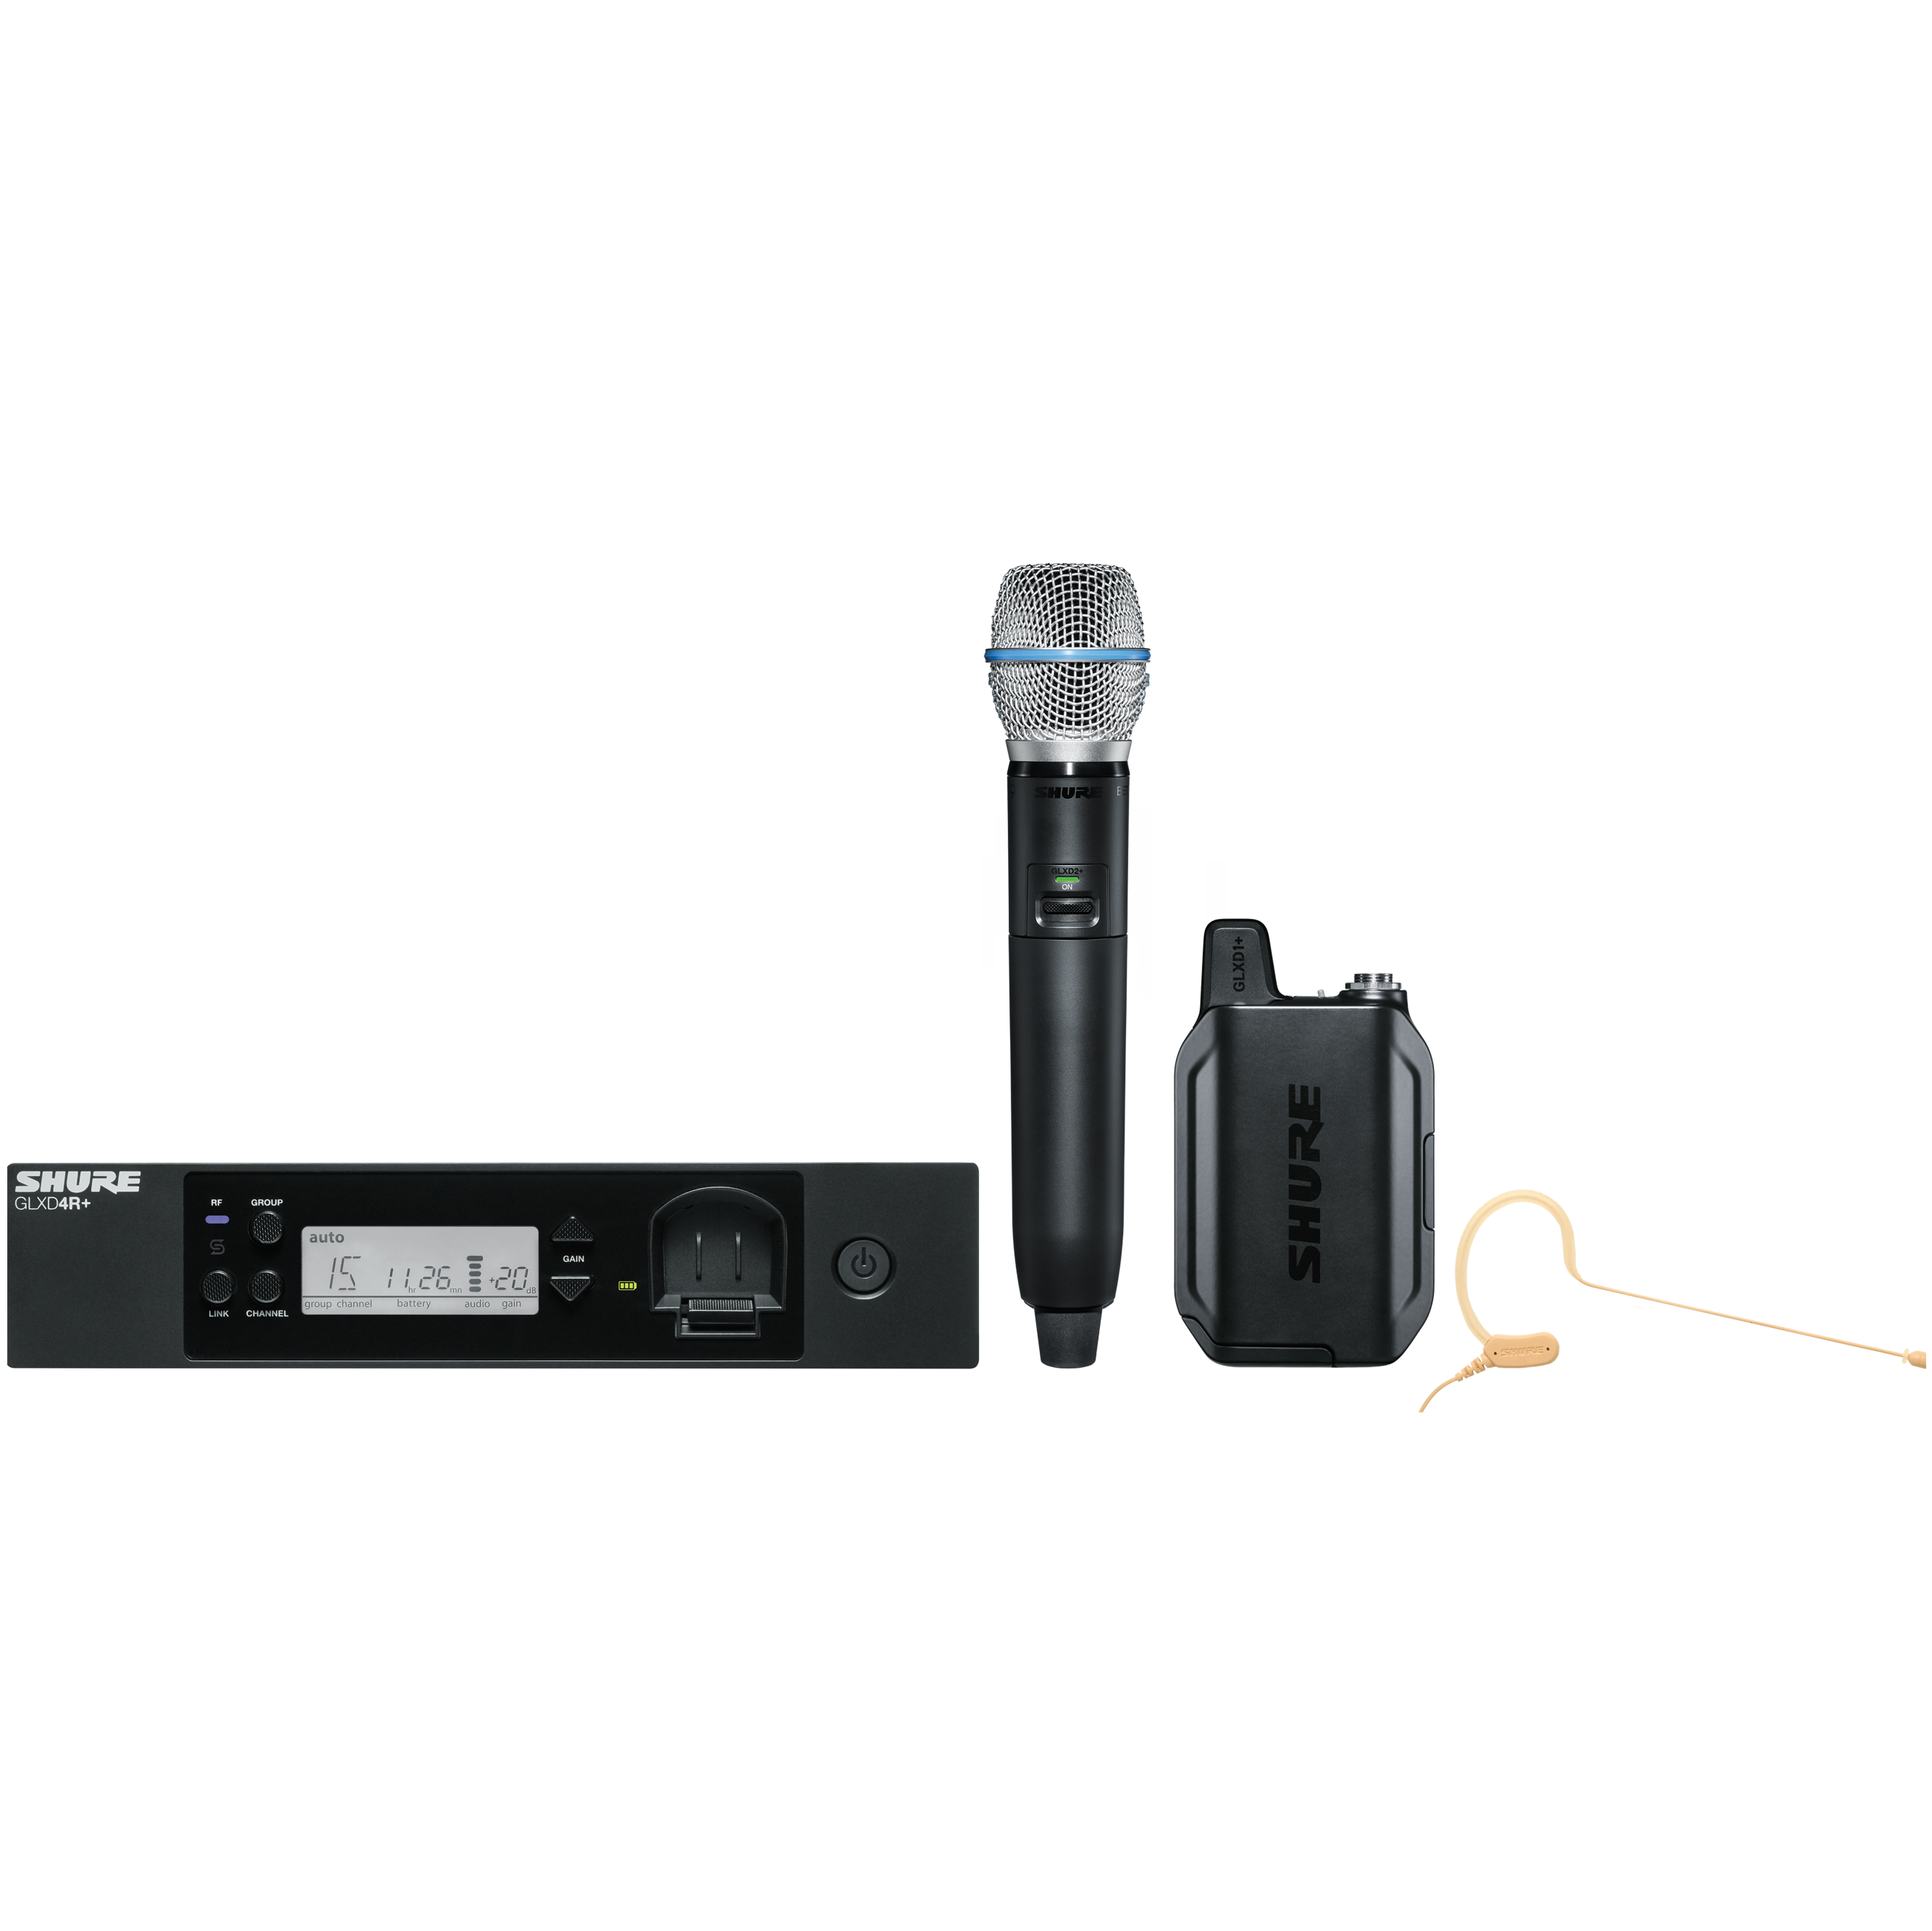 Shure GLX-D+ Dual Band Rack Combination Wireless Microphone System